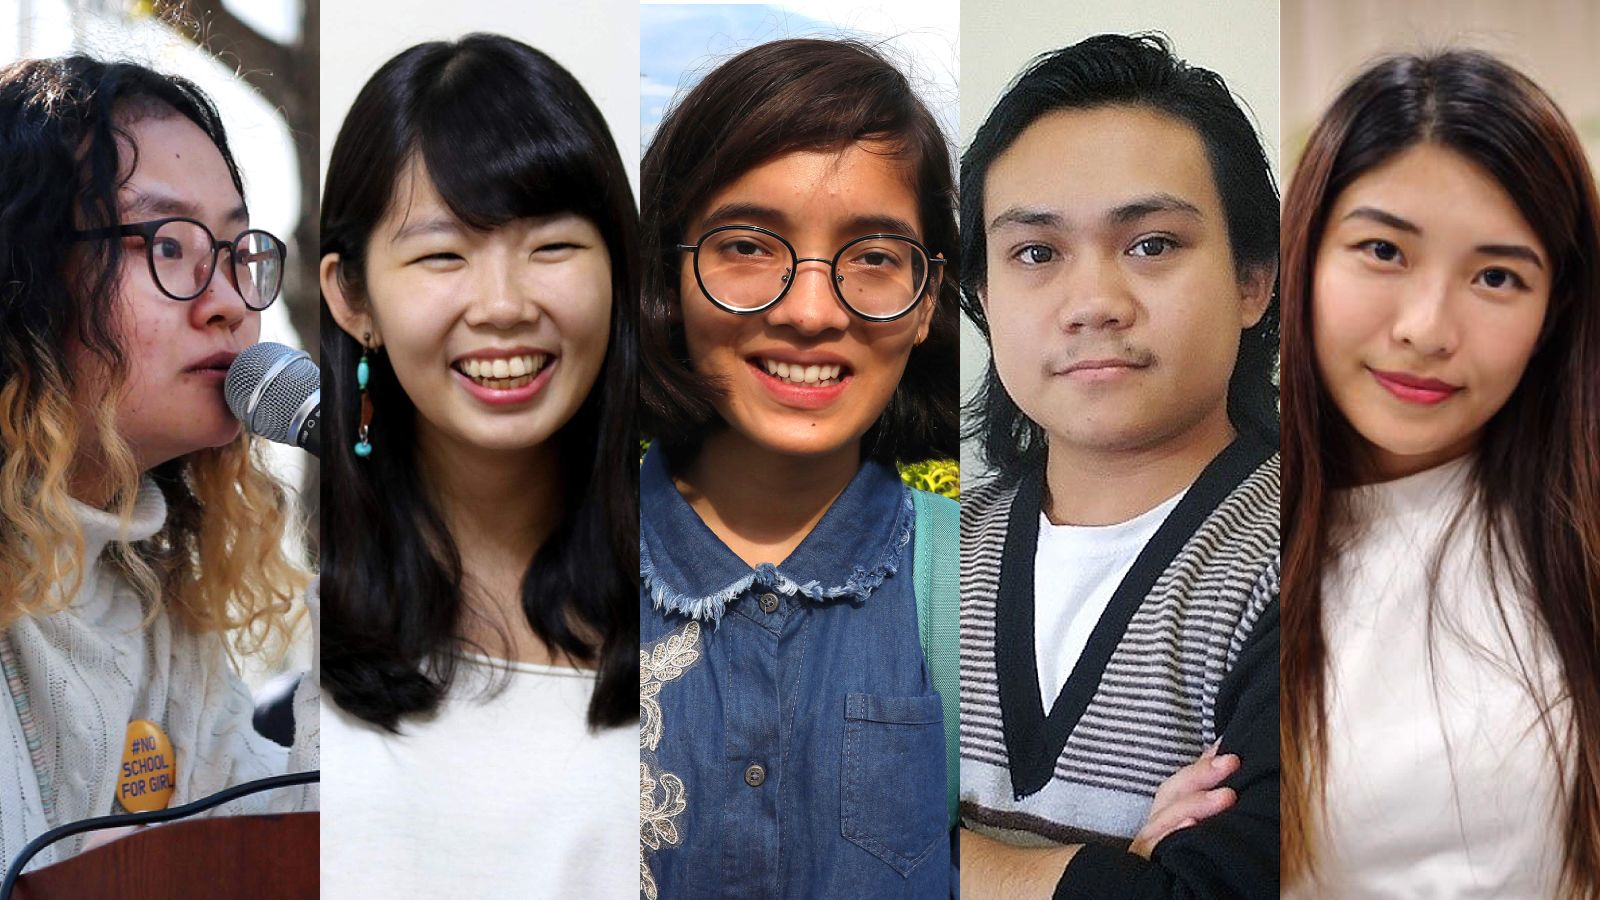 Asian Girls Sex Movies - Meet 5 young activists who drove change in Asia this year | CNN